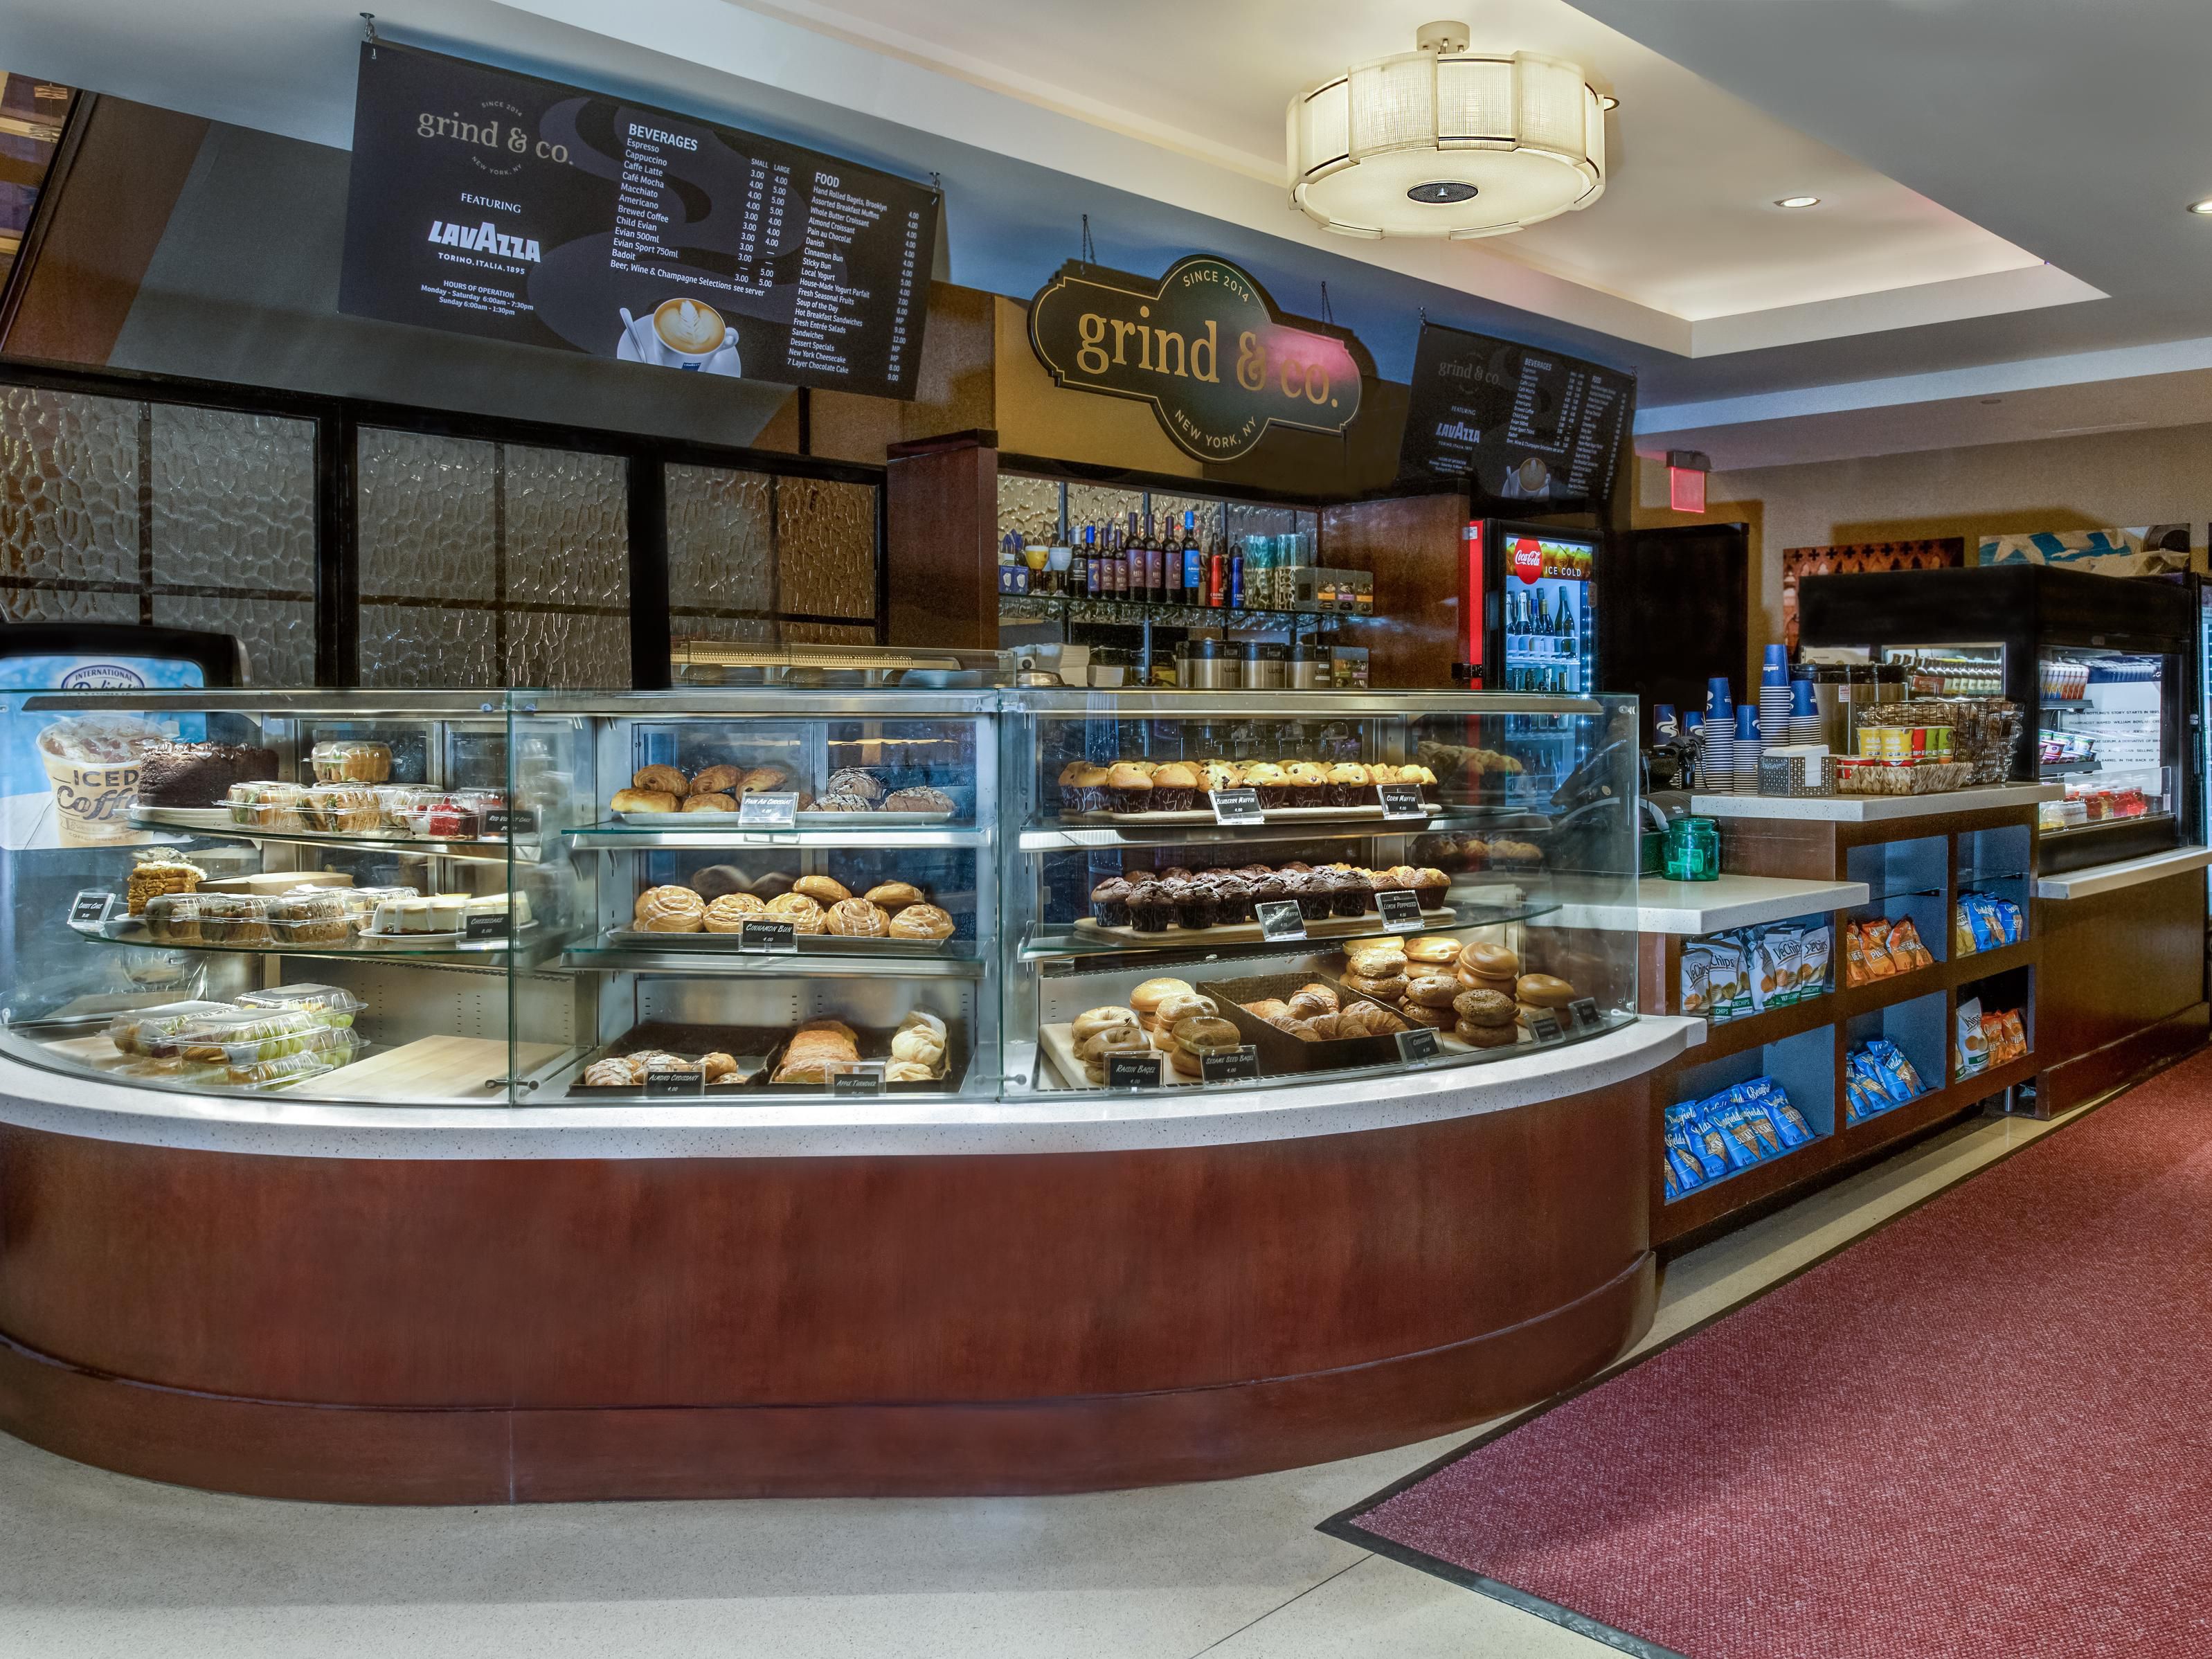 Begin your day at Grind n Co Coffee! Discover a world of beverages, featuring local Stone Street Coffee. Explore grab-and-go bites. Elevate your experience with wine for a Central Park picnic. Your day, elevated!